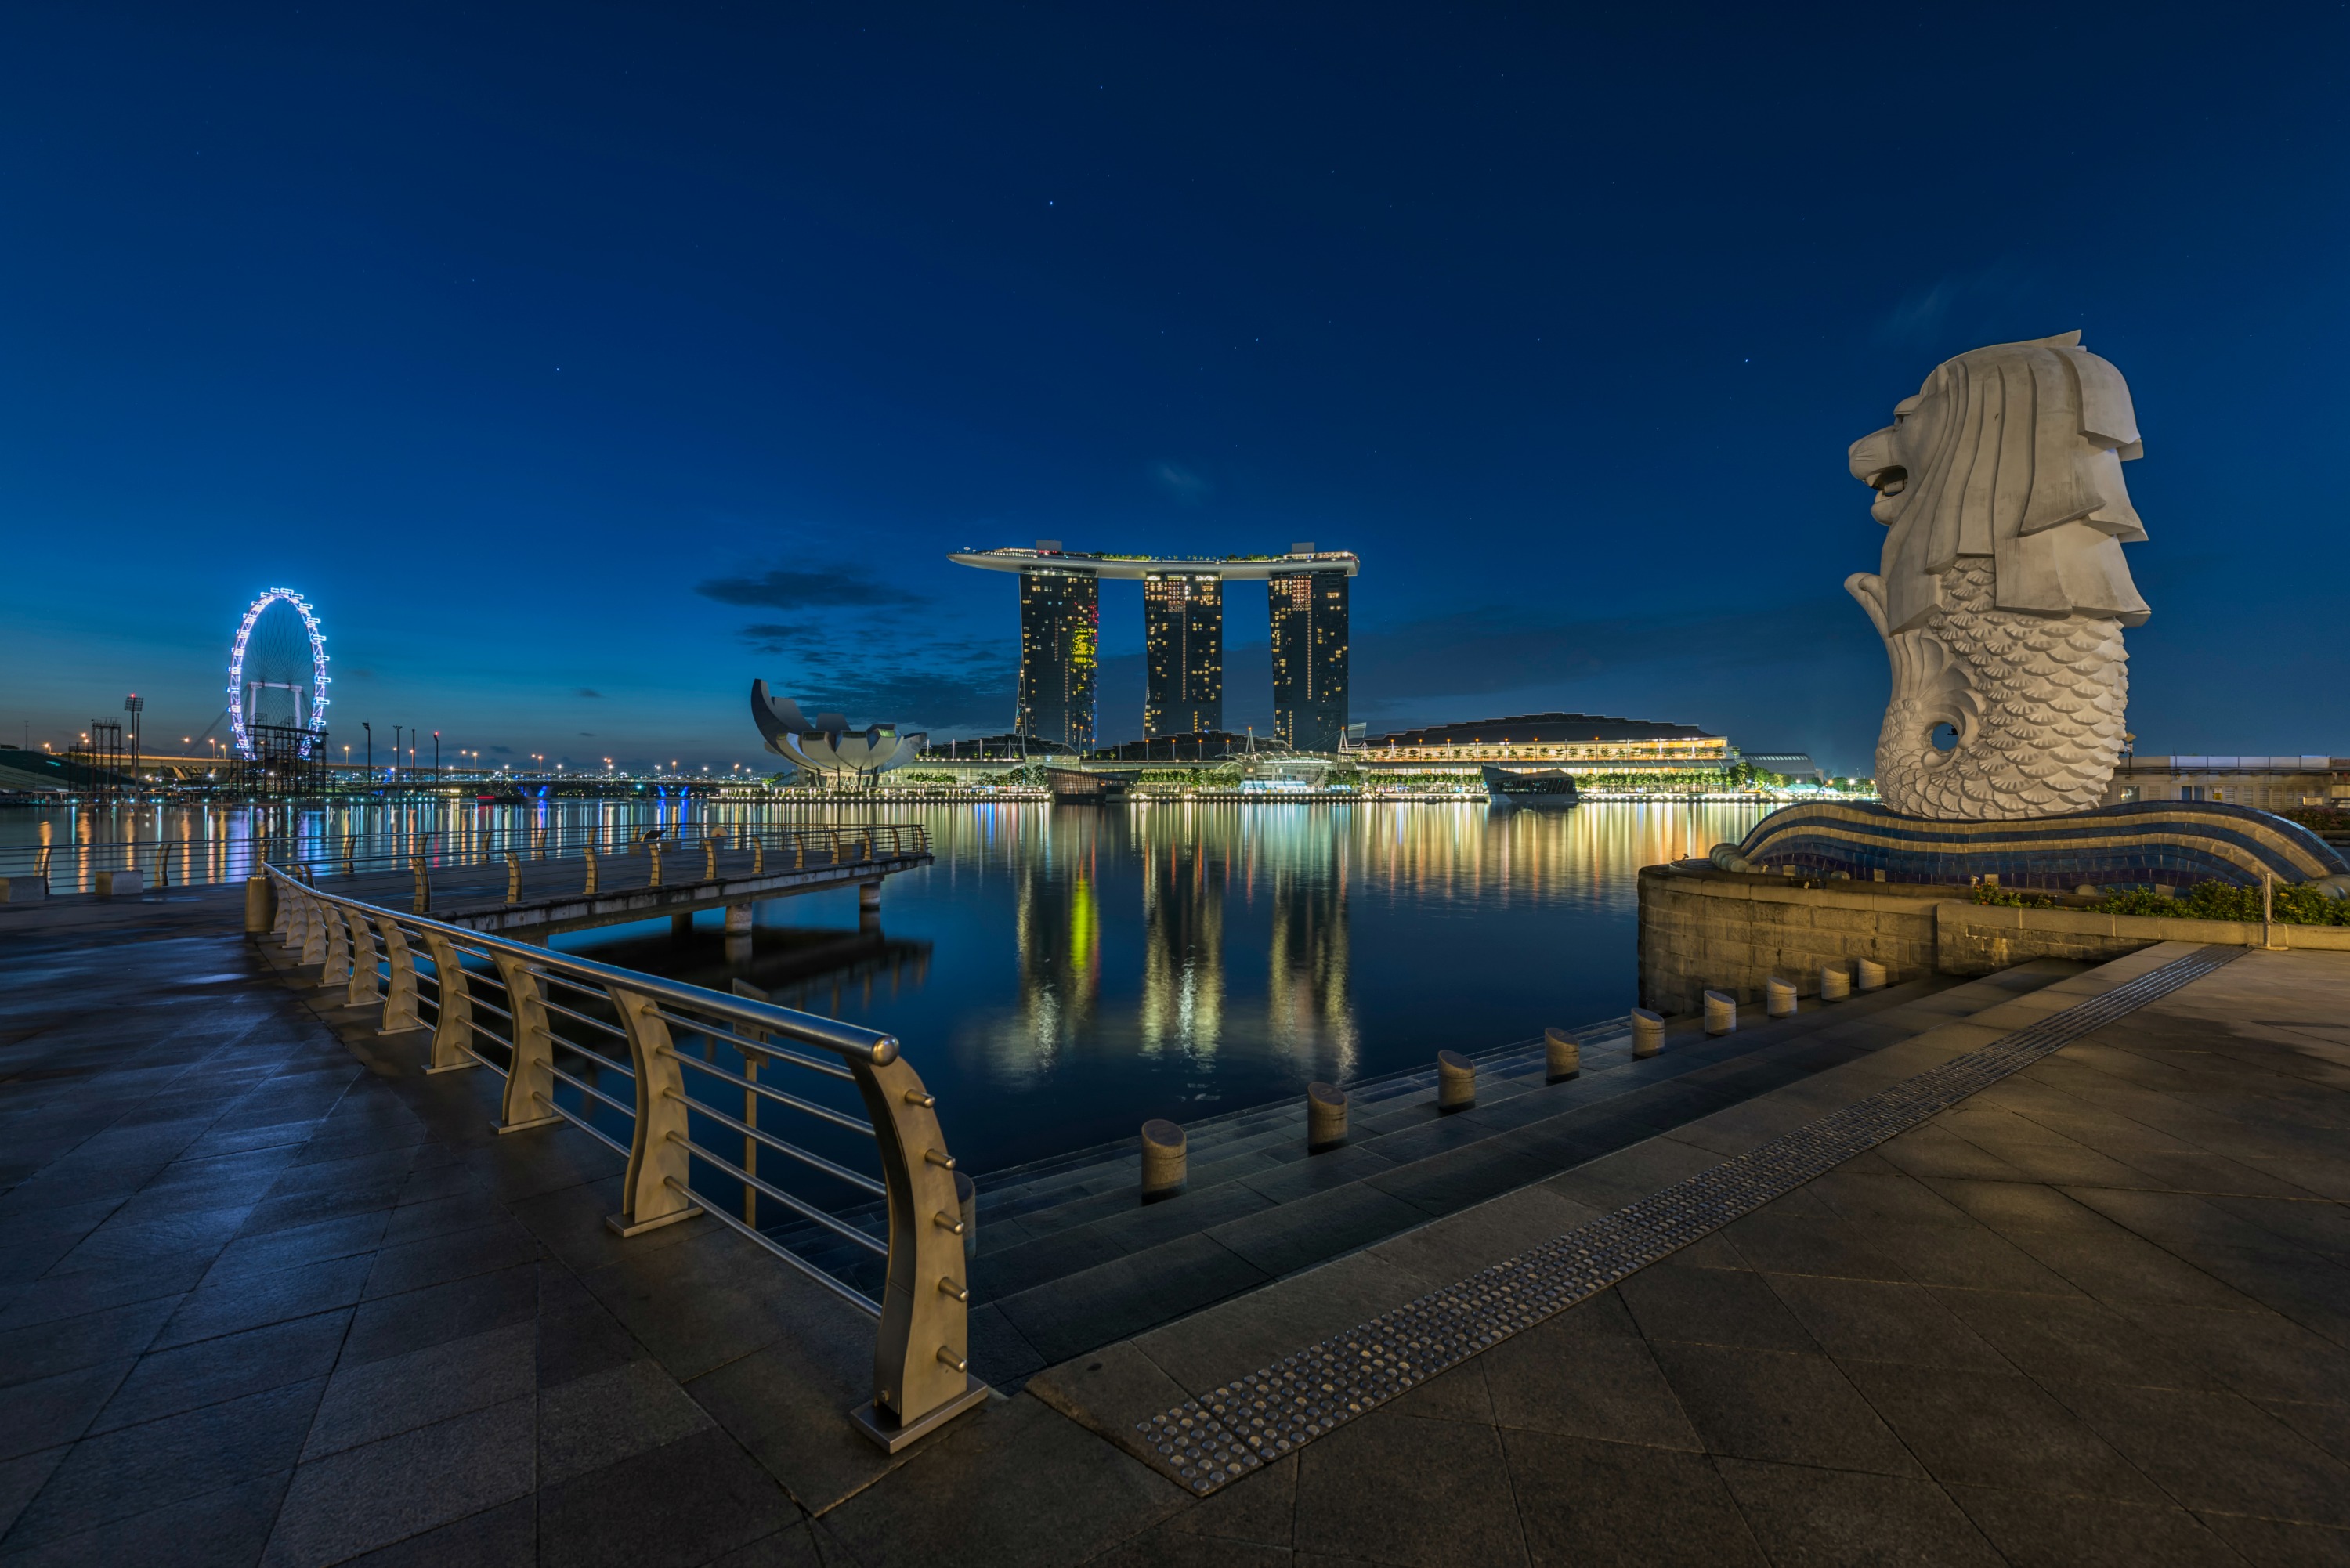 View from a corner of the Marina Bay pier, the Merlion, Marina Bay Sands Hotel and the Singapore flyer in the background